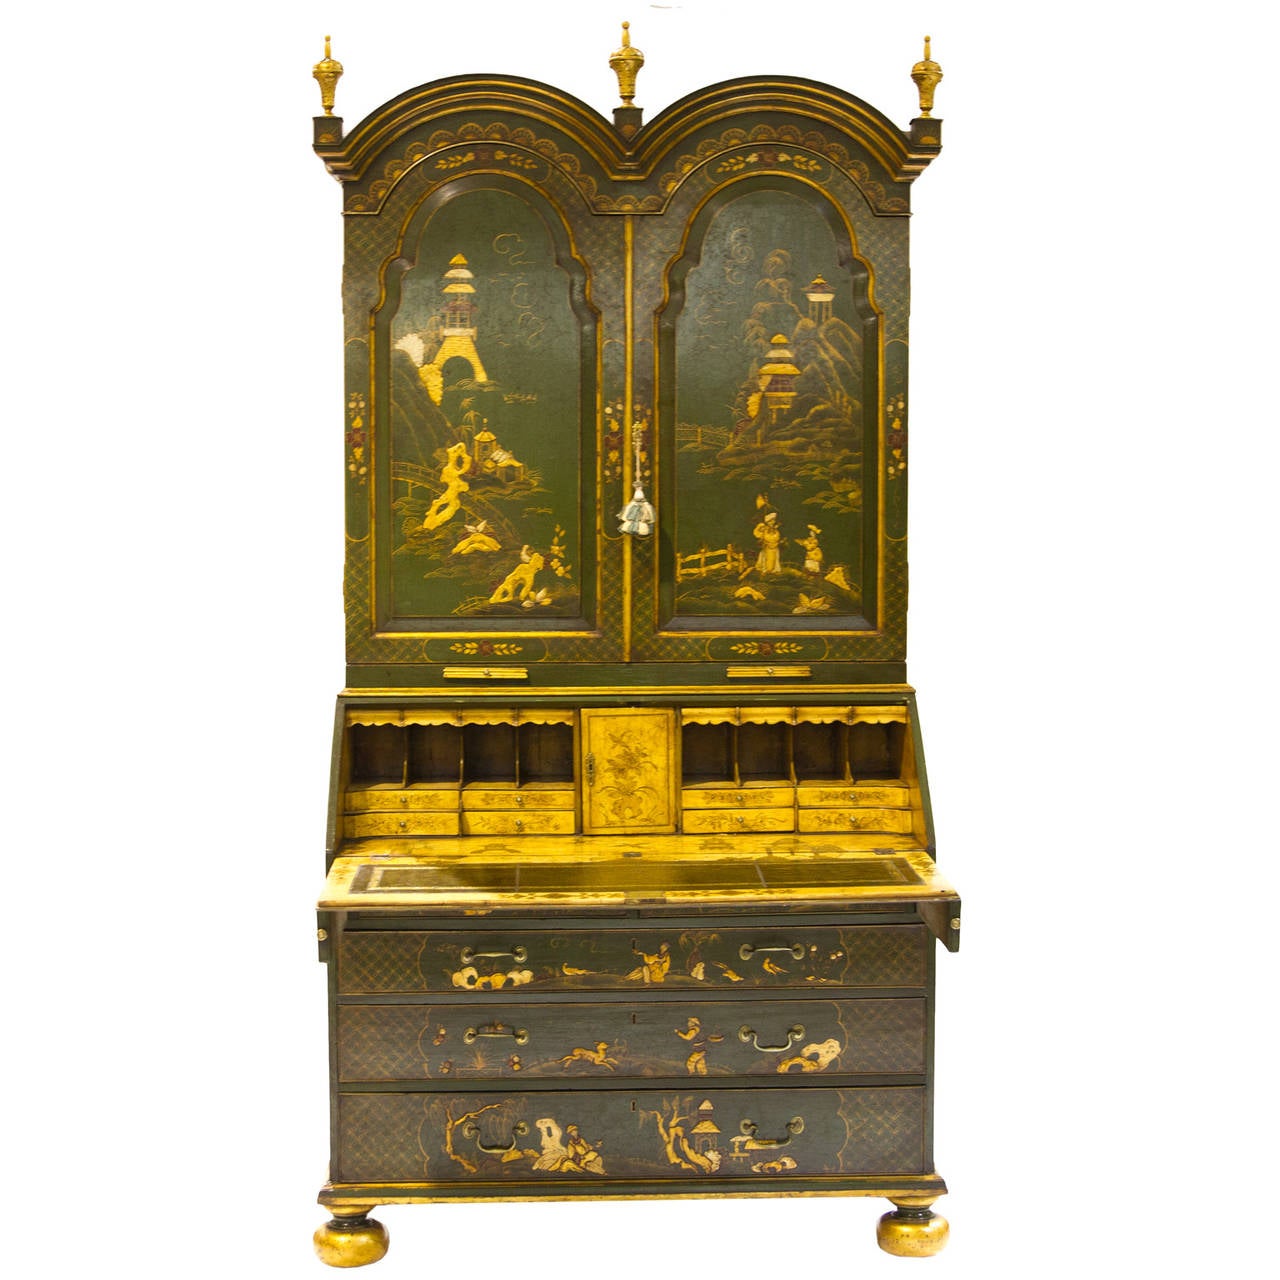 This is a rare Queen Anne double-dome top green and brown chinoiserie lacquered secretaire with fitted interior. Wonderful decoration adorns this piece inside and out. Flip-top desk secretaire with beautiful yellow color ground and gilt painted